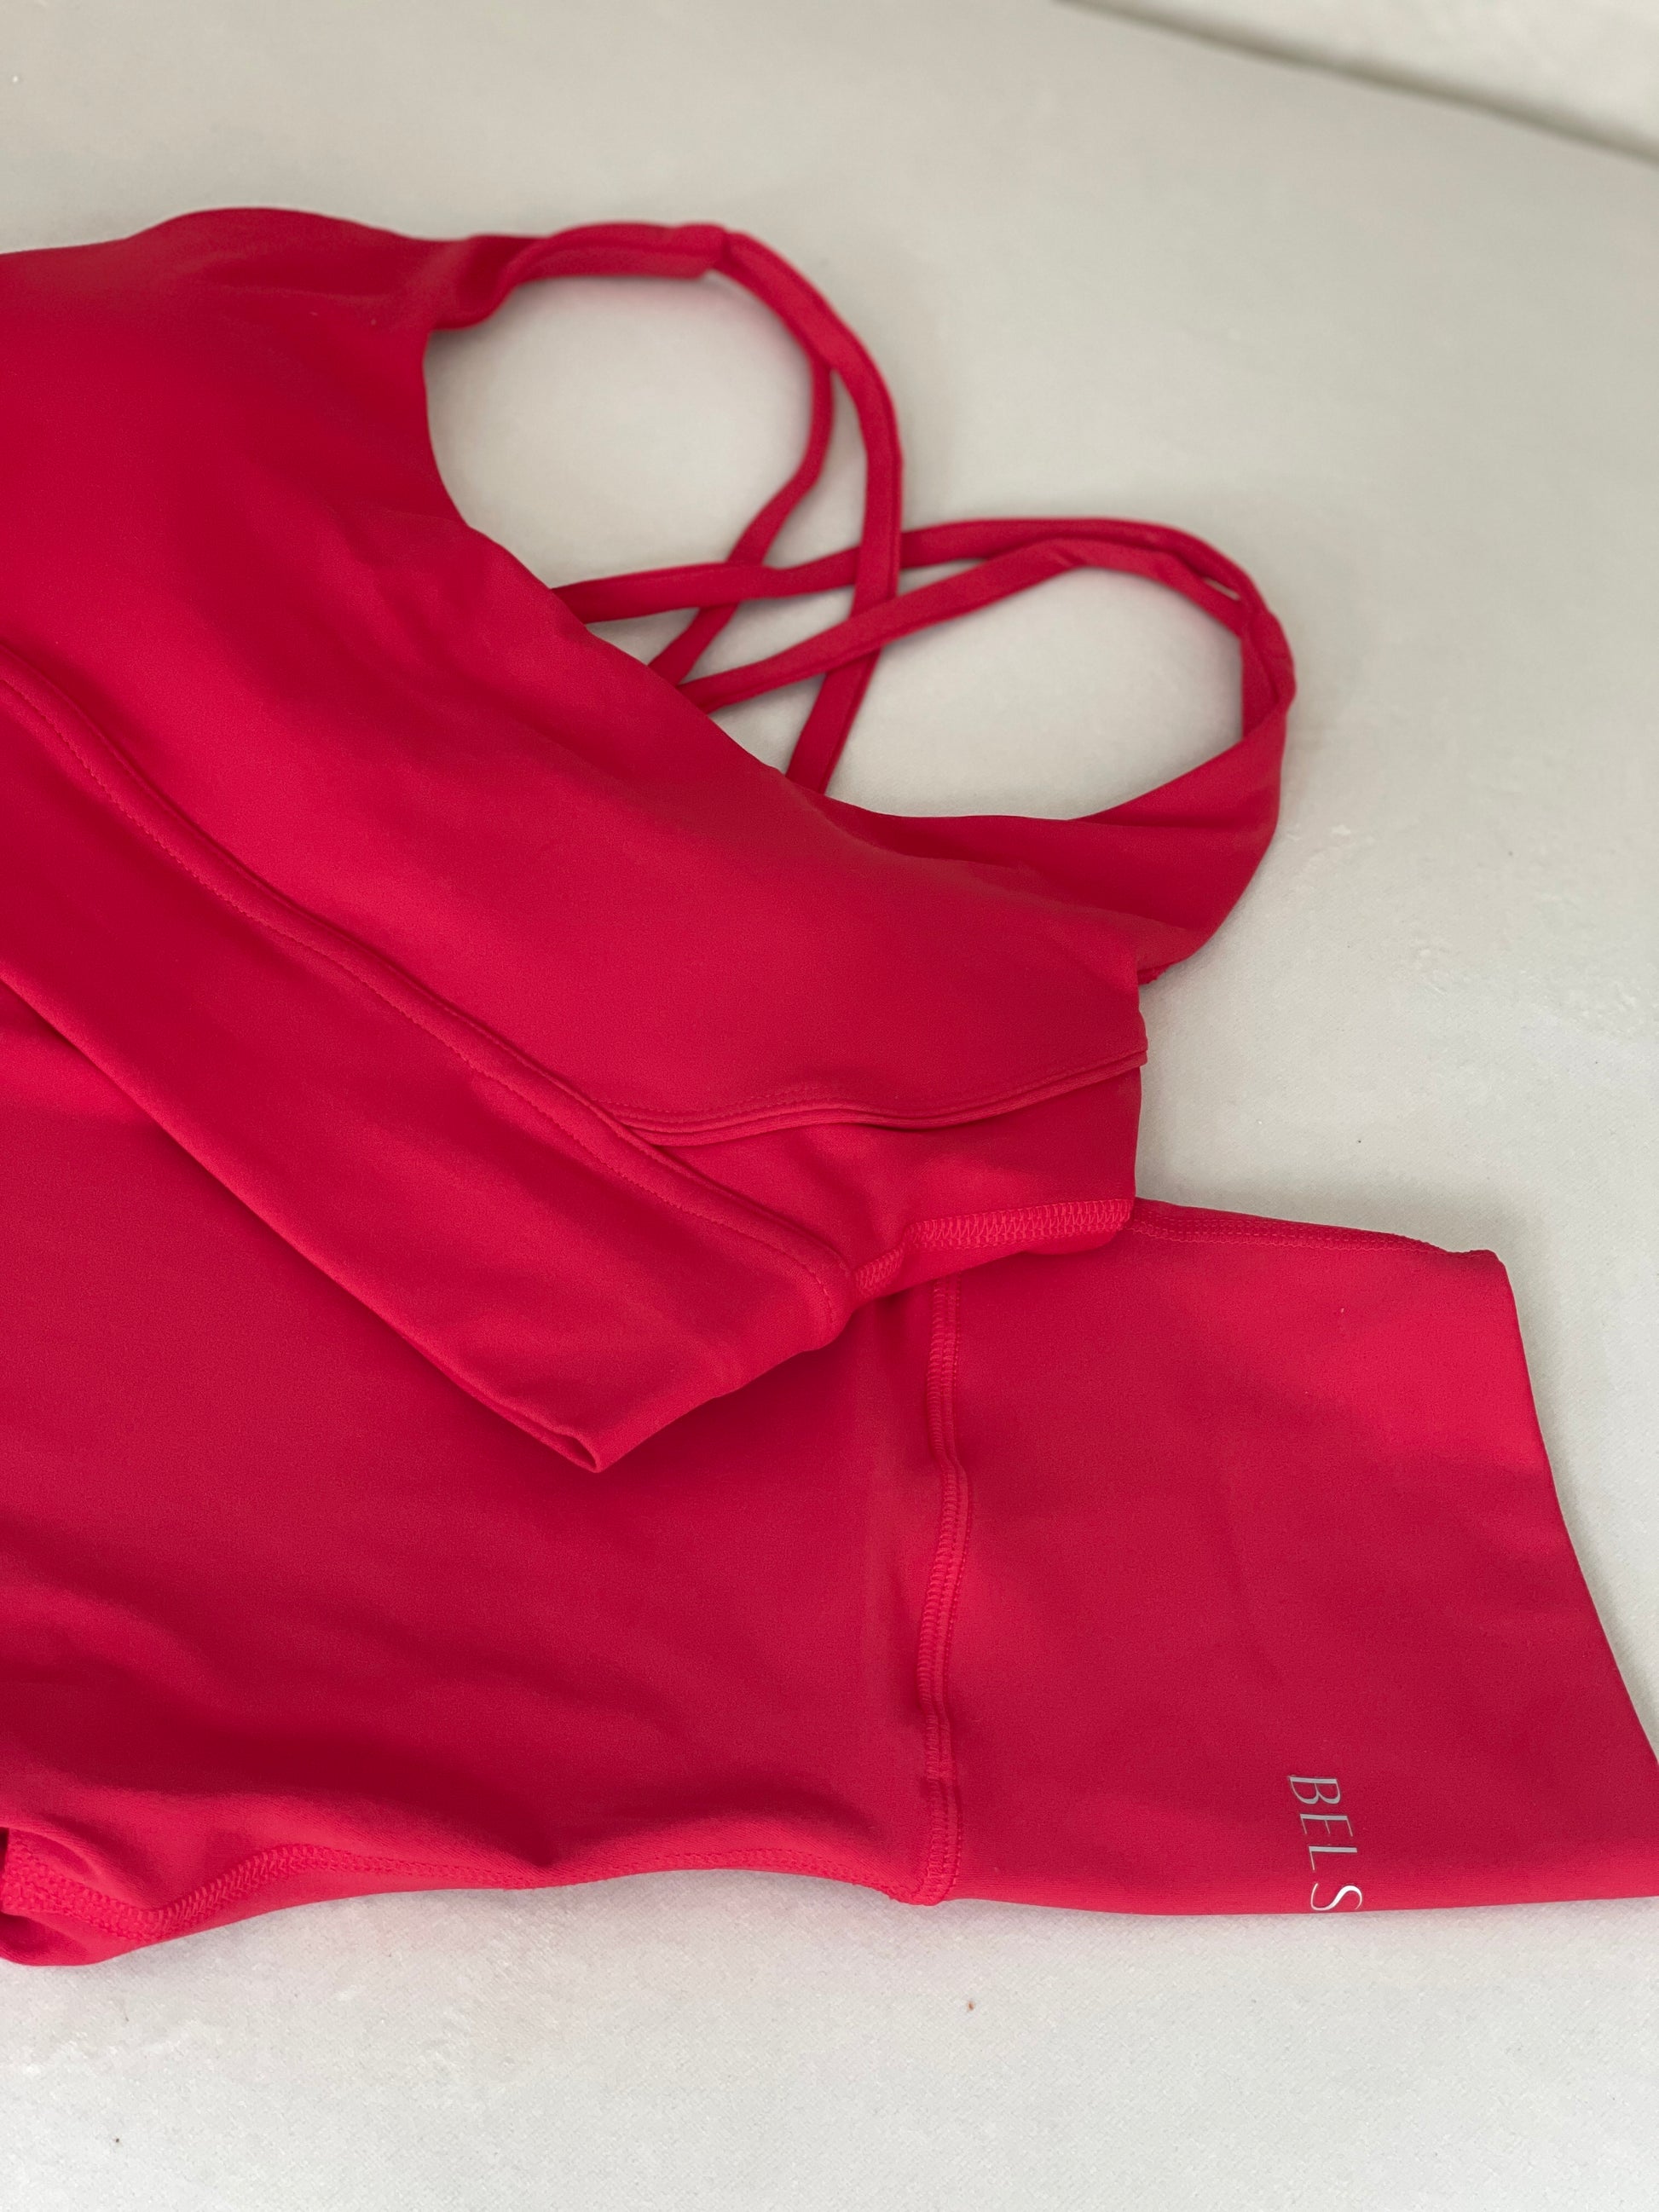 Athletic set in red